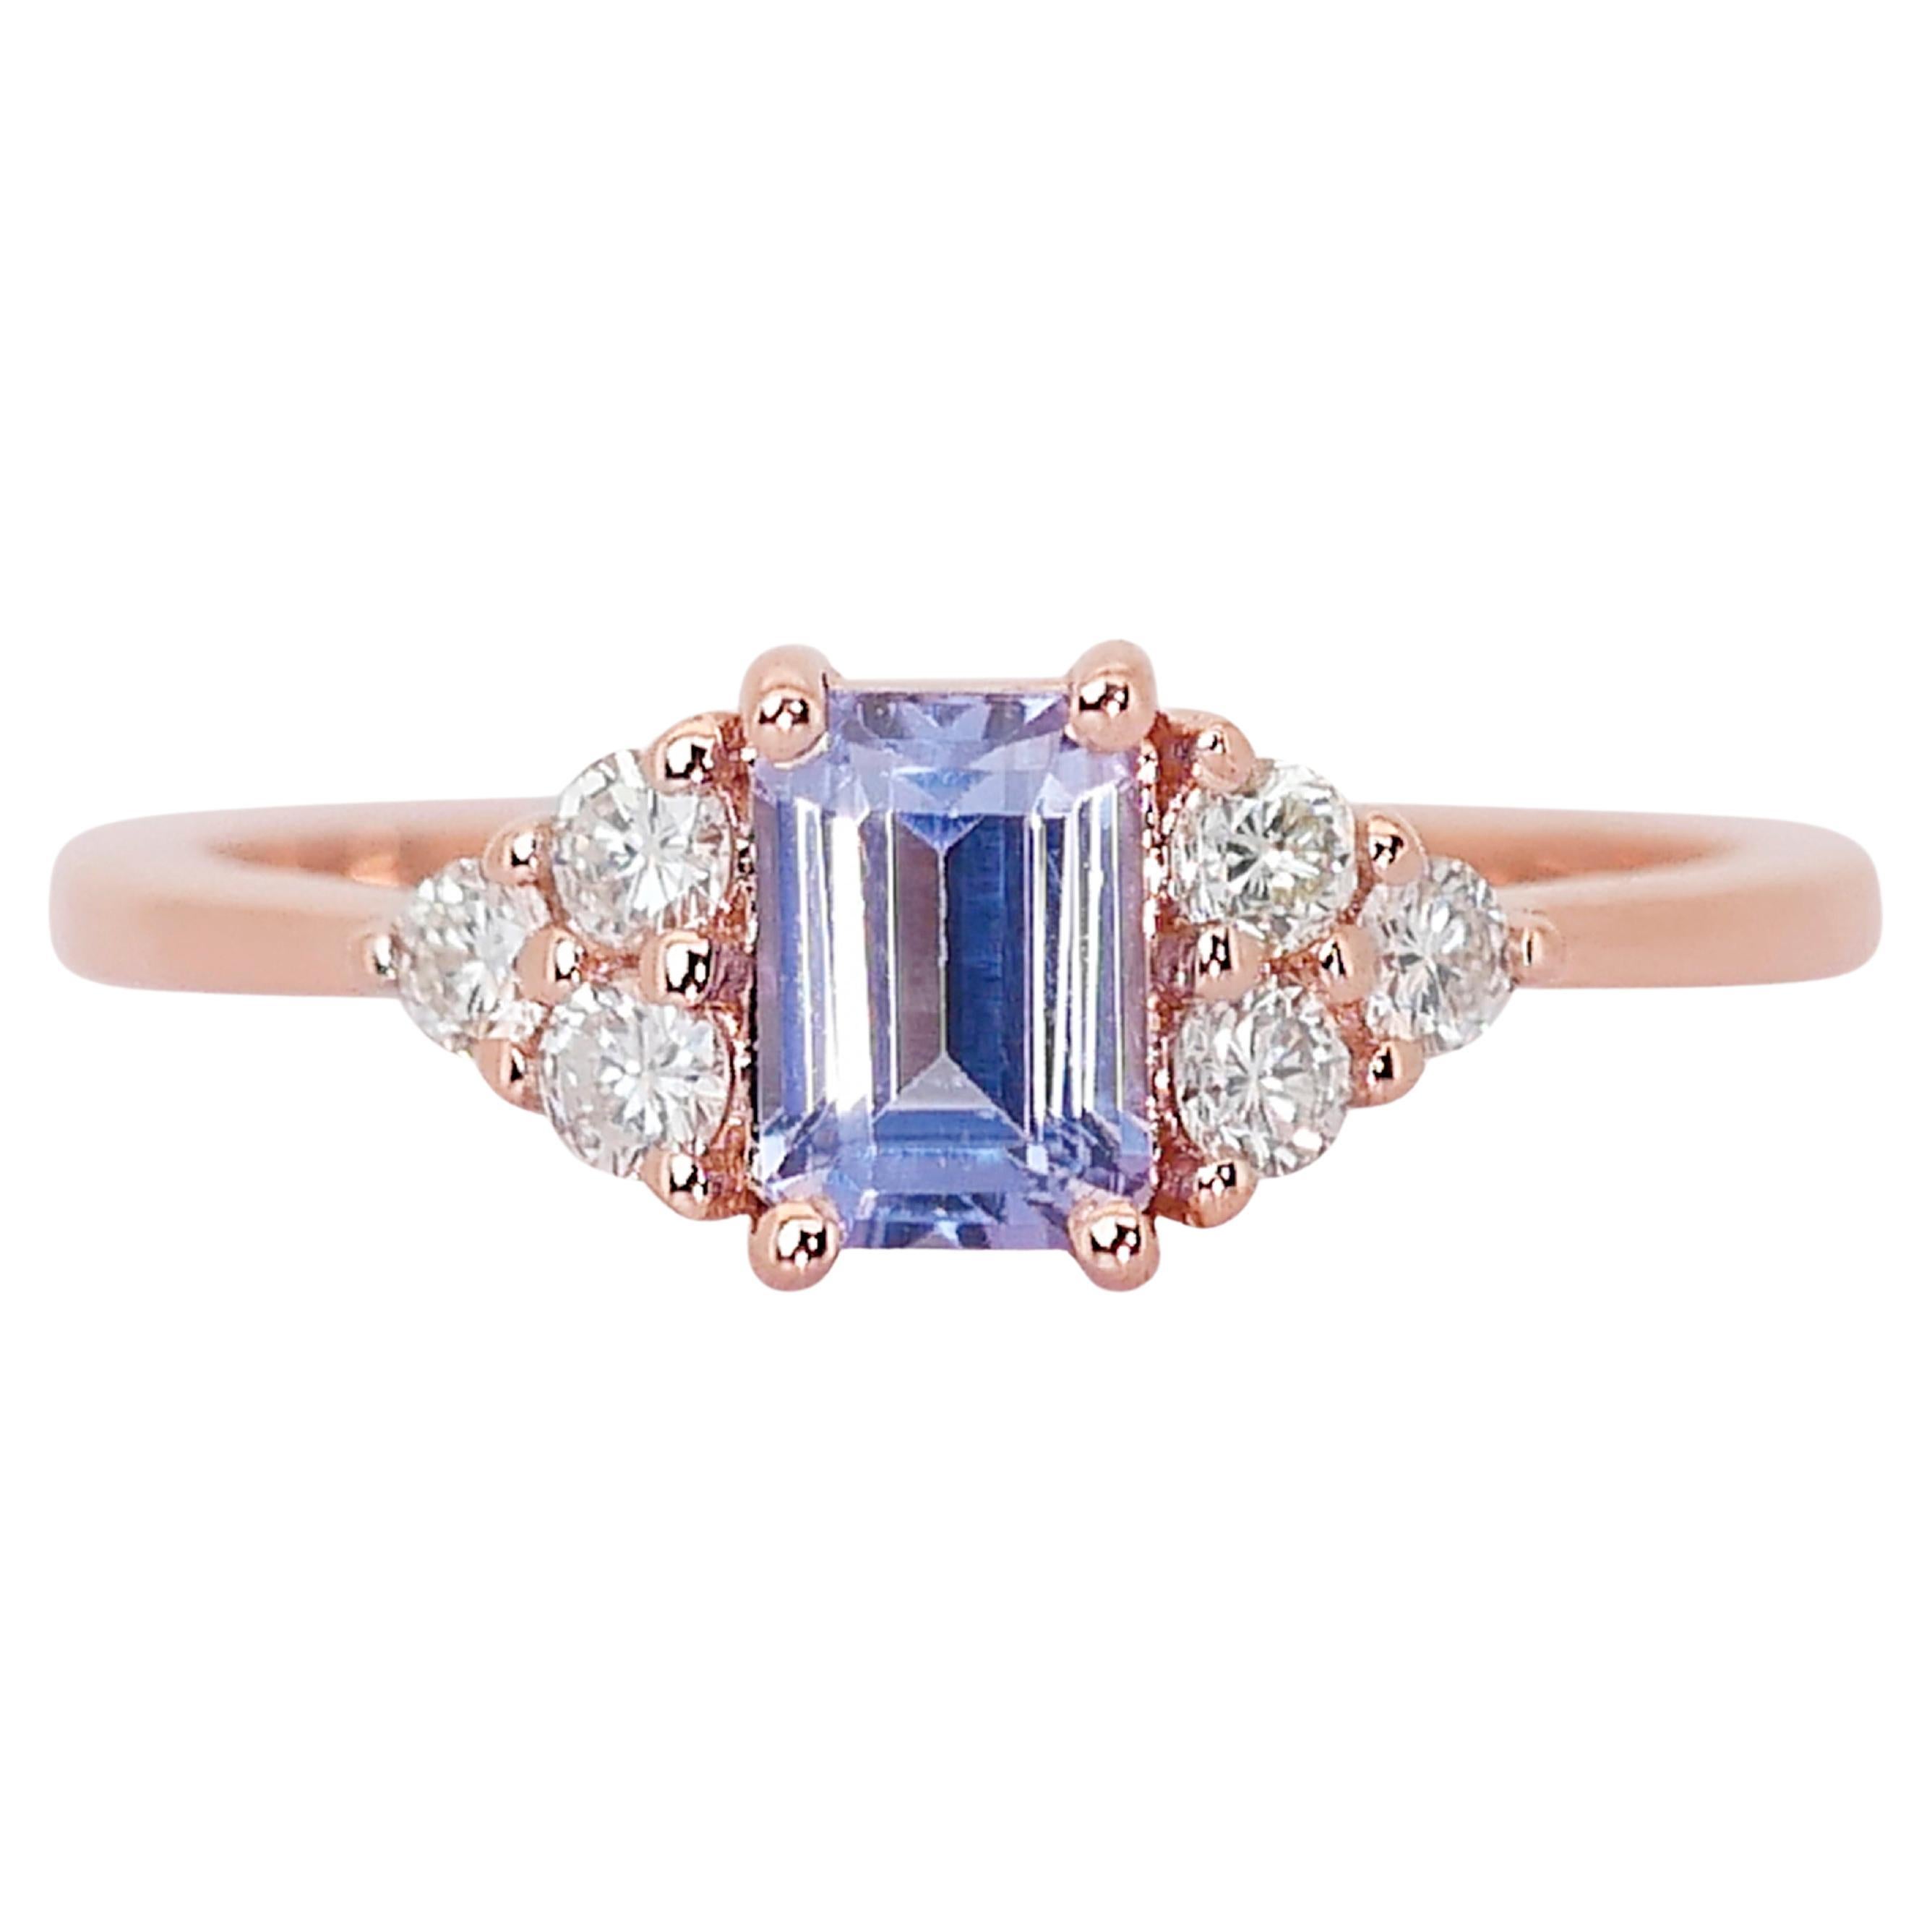 Captivating 1.14 ct Tanzanite and Diamond Pave Ring in 14k Rose Gold - IGI  For Sale